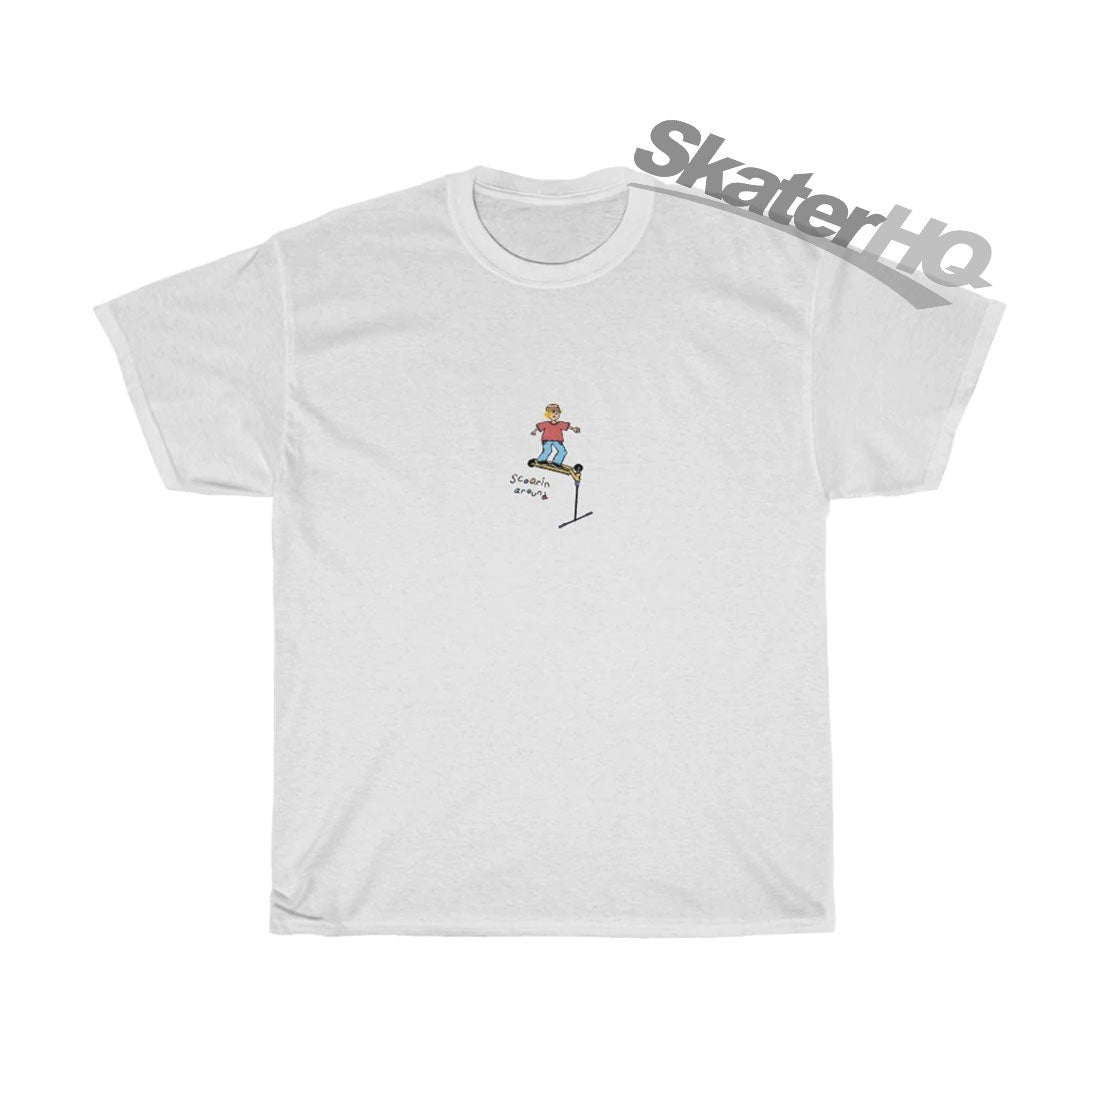 Saundezy Scoofin S/S T-Shirt - White Apparel Tshirts